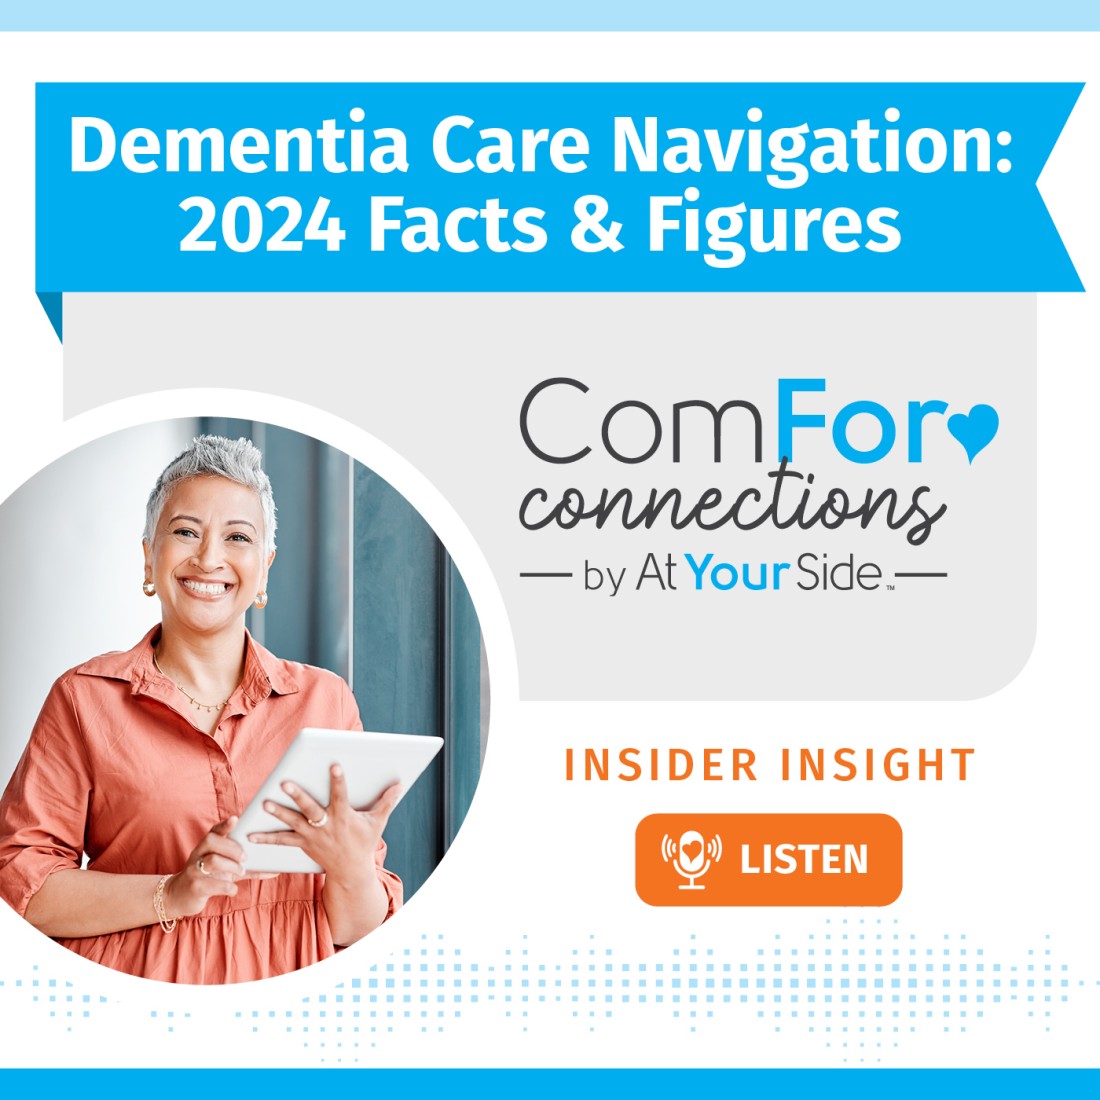 Podcast Resources: Expanding Your Home Care Knowledge - Social_Media__Dementia_Care_Navigation_2024_Facts_%26_Figures_(1)